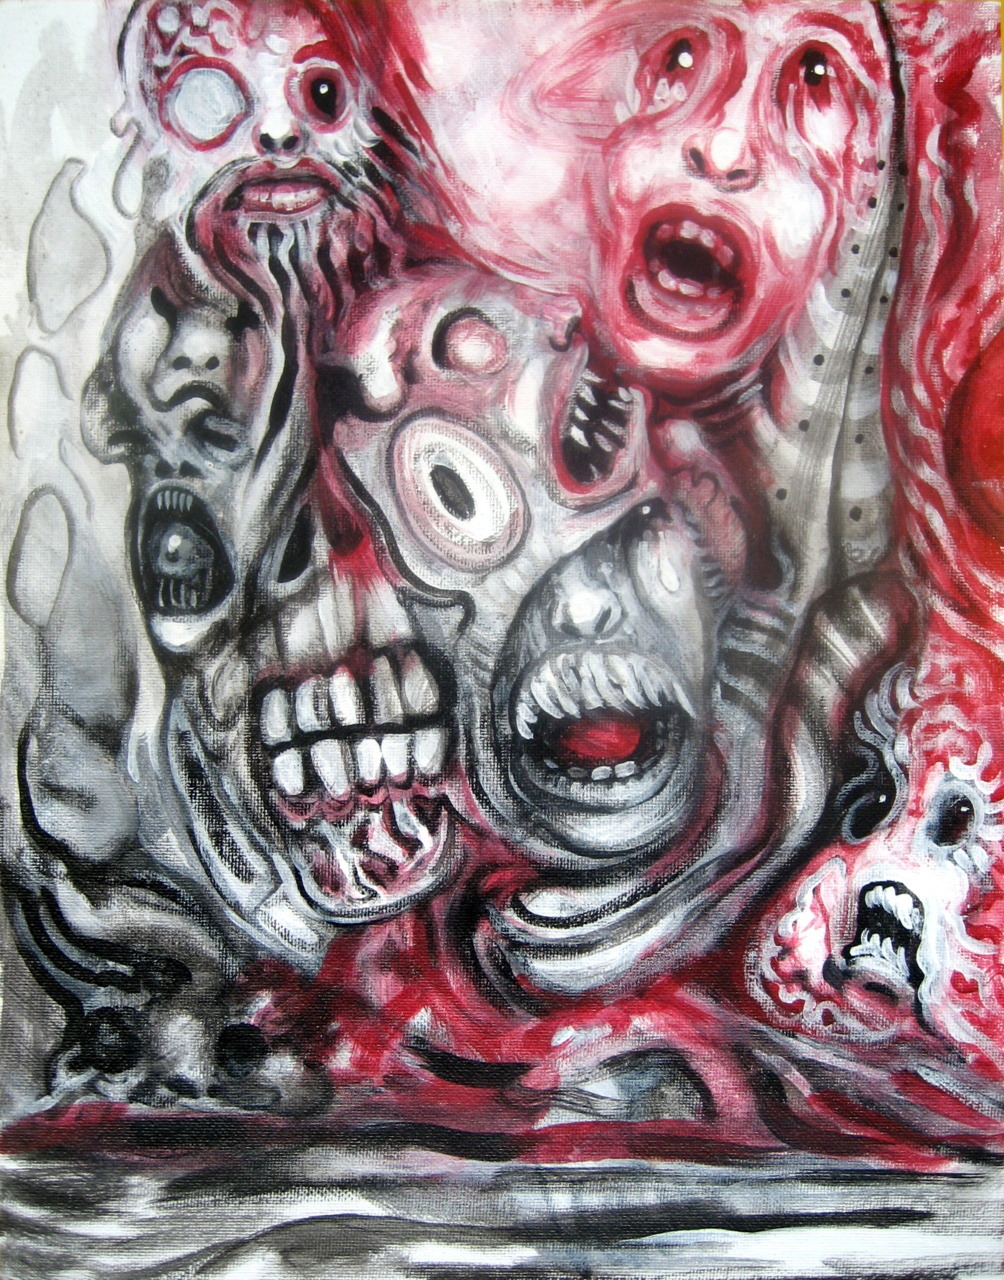 madjimbeau:
“ Brain down the Drain, leaving mainly only Pain (a painter’s last testament).
I was dying when I painted this; it was to be my last work. But I didn’t die after all, and my strange brain survived with little change, so the work goes on....